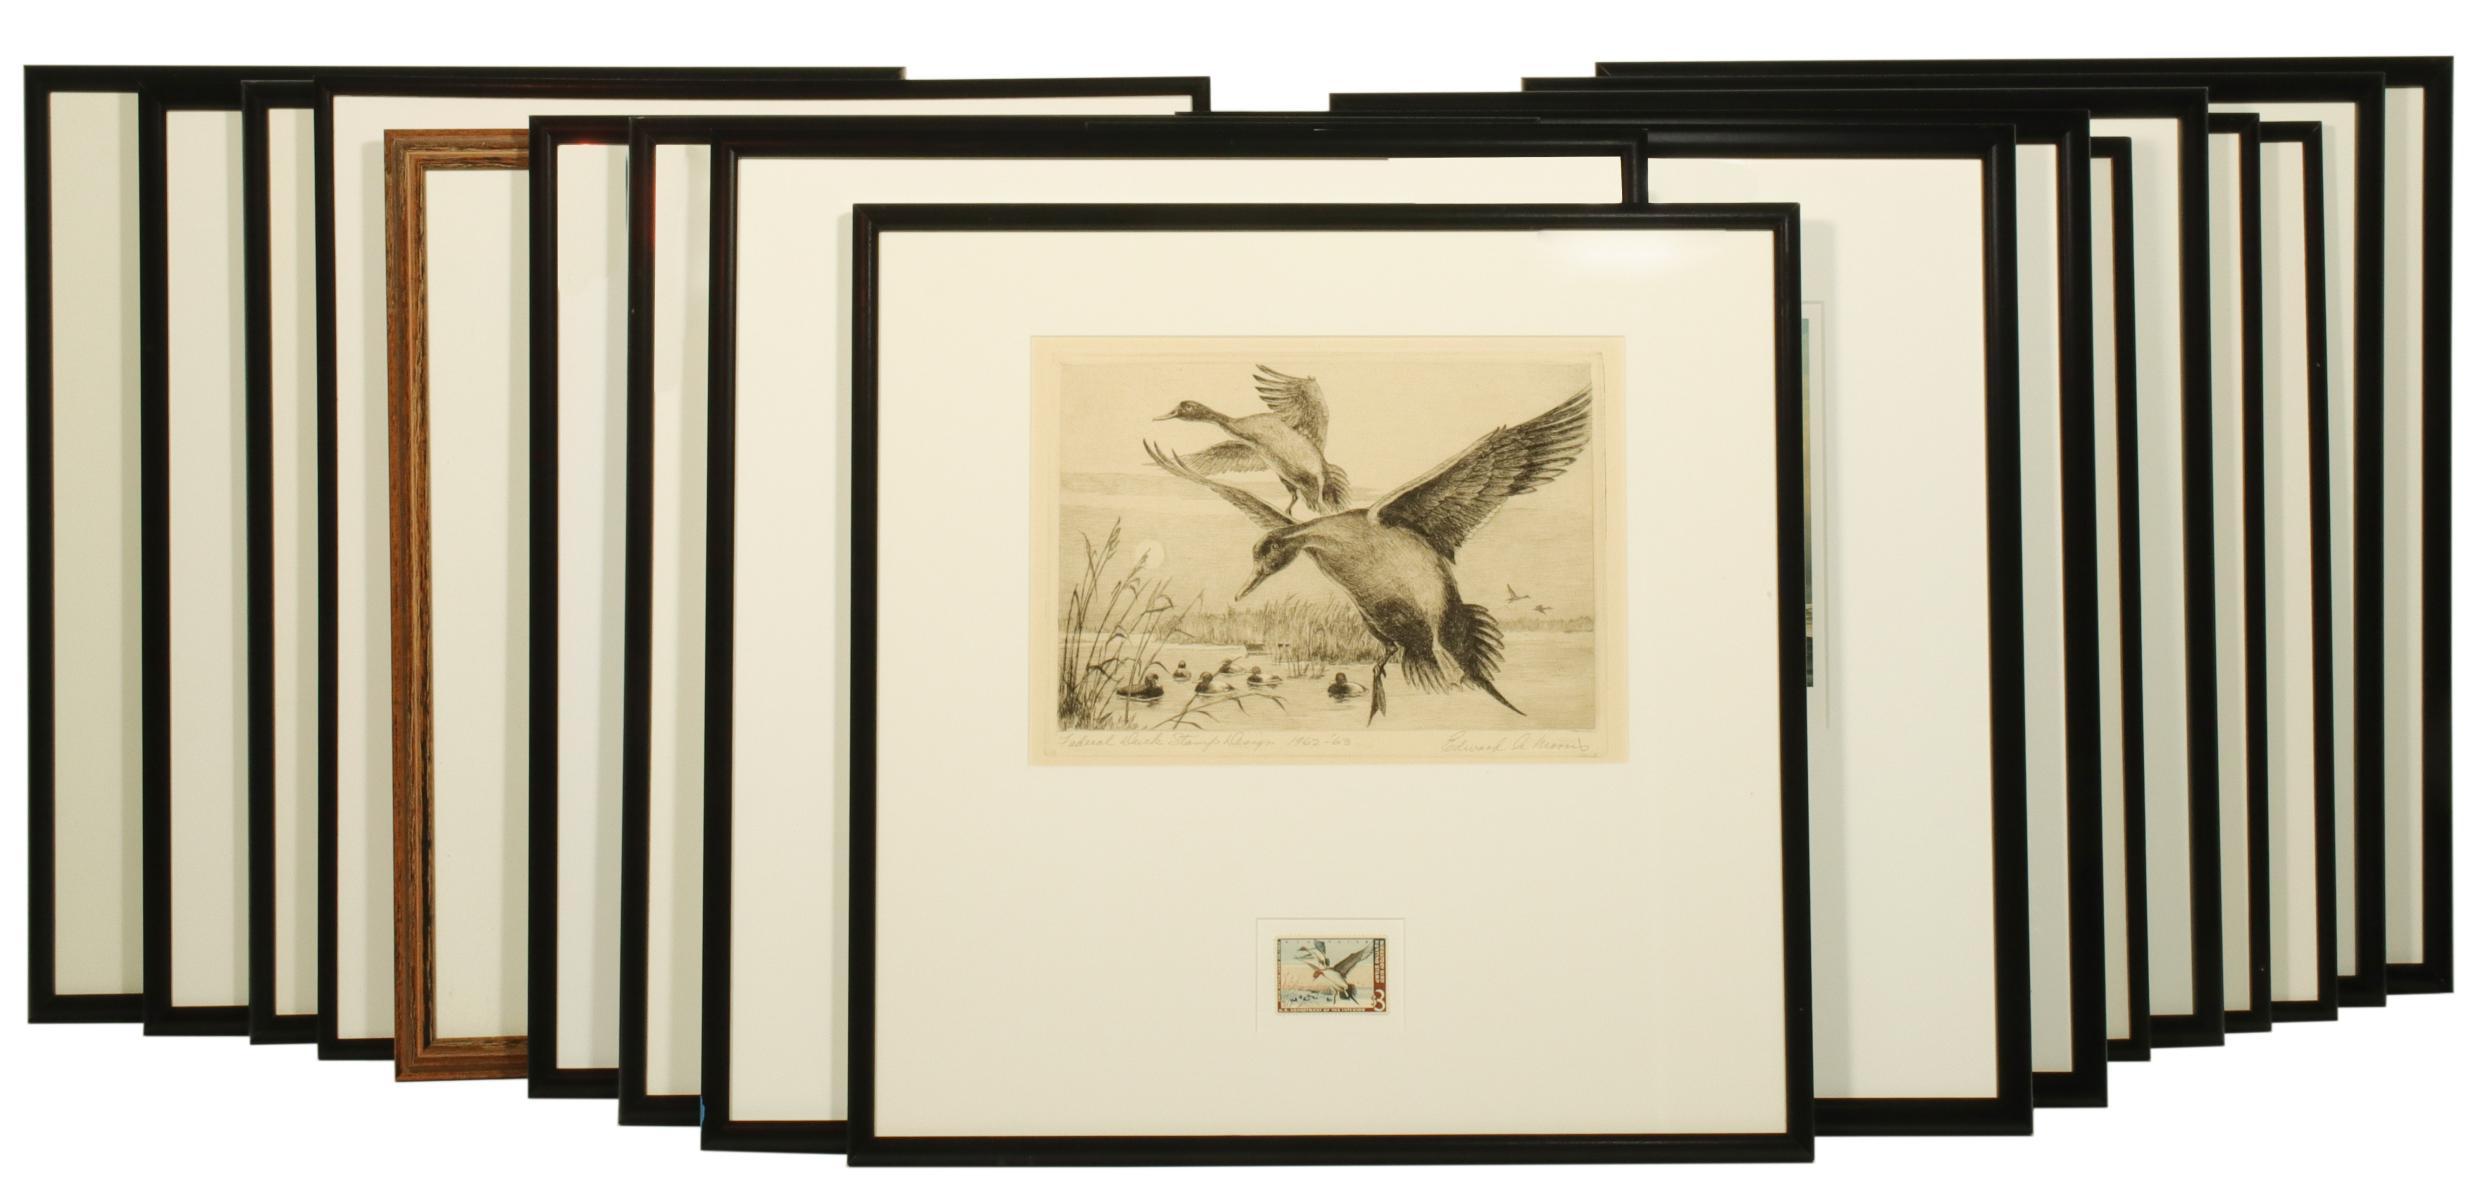 A LARGE COLLECTION OF FEDERAL DUCK STAMPS AND PRINTS